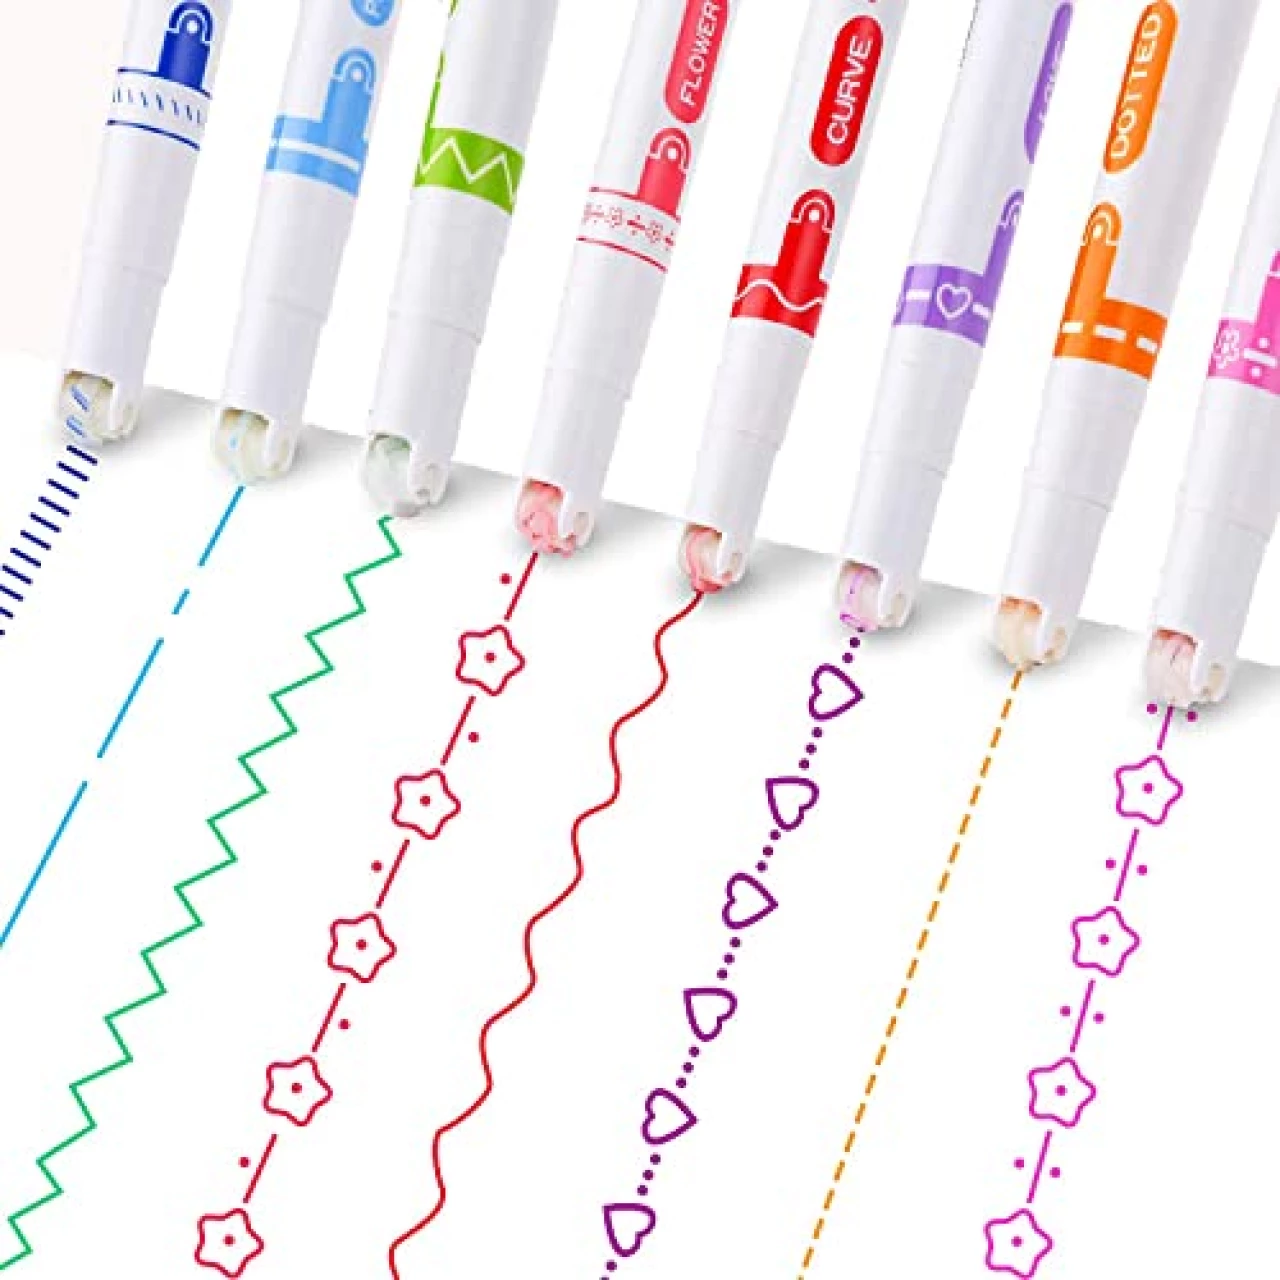 Ann Bully Curve Highlighter Pen Set, 8 Colors Fine Lines &amp; 7 Different Patterned Stamp Highlighters Colored Curve Pens